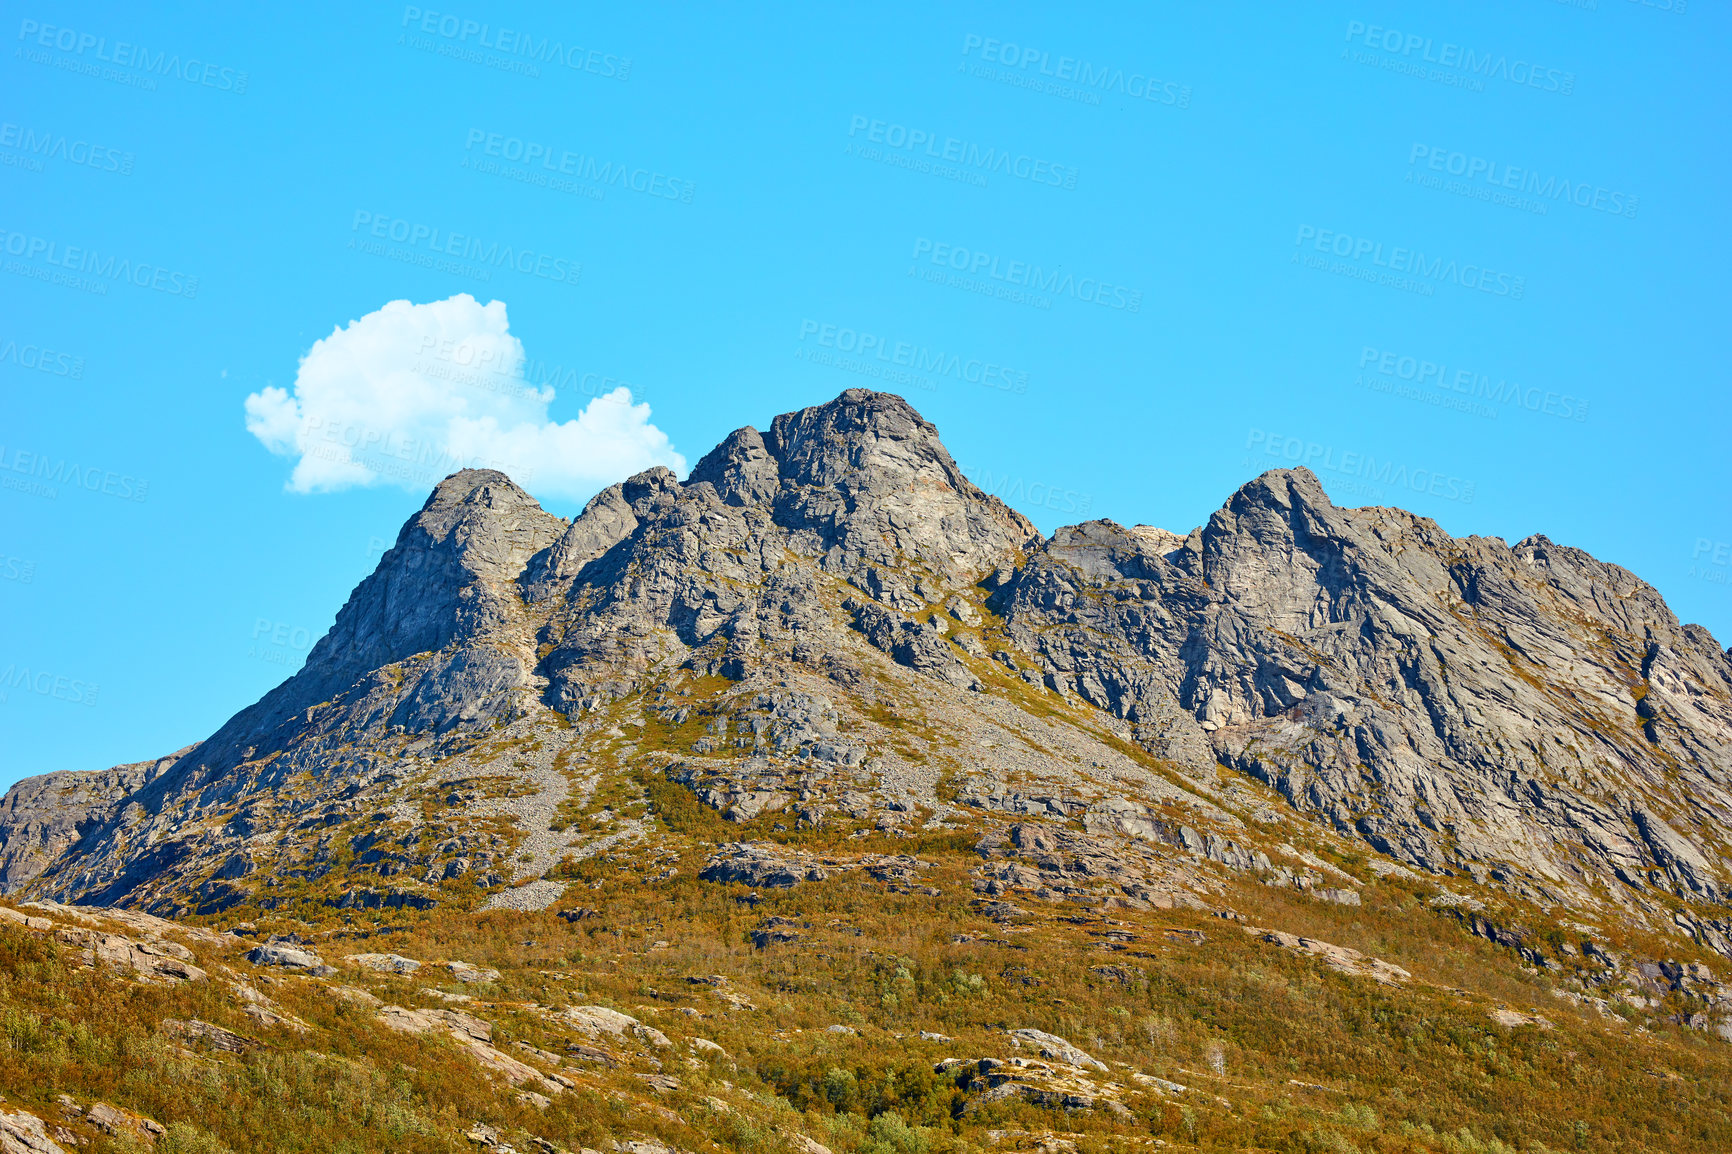 Buy stock photo Landscape view of mountains, blue sky with clouds and copy space in Norway. Hiking, discovering scenic countryside and rough terrain. Sun shining on vast background of nature expanse and hiking trail